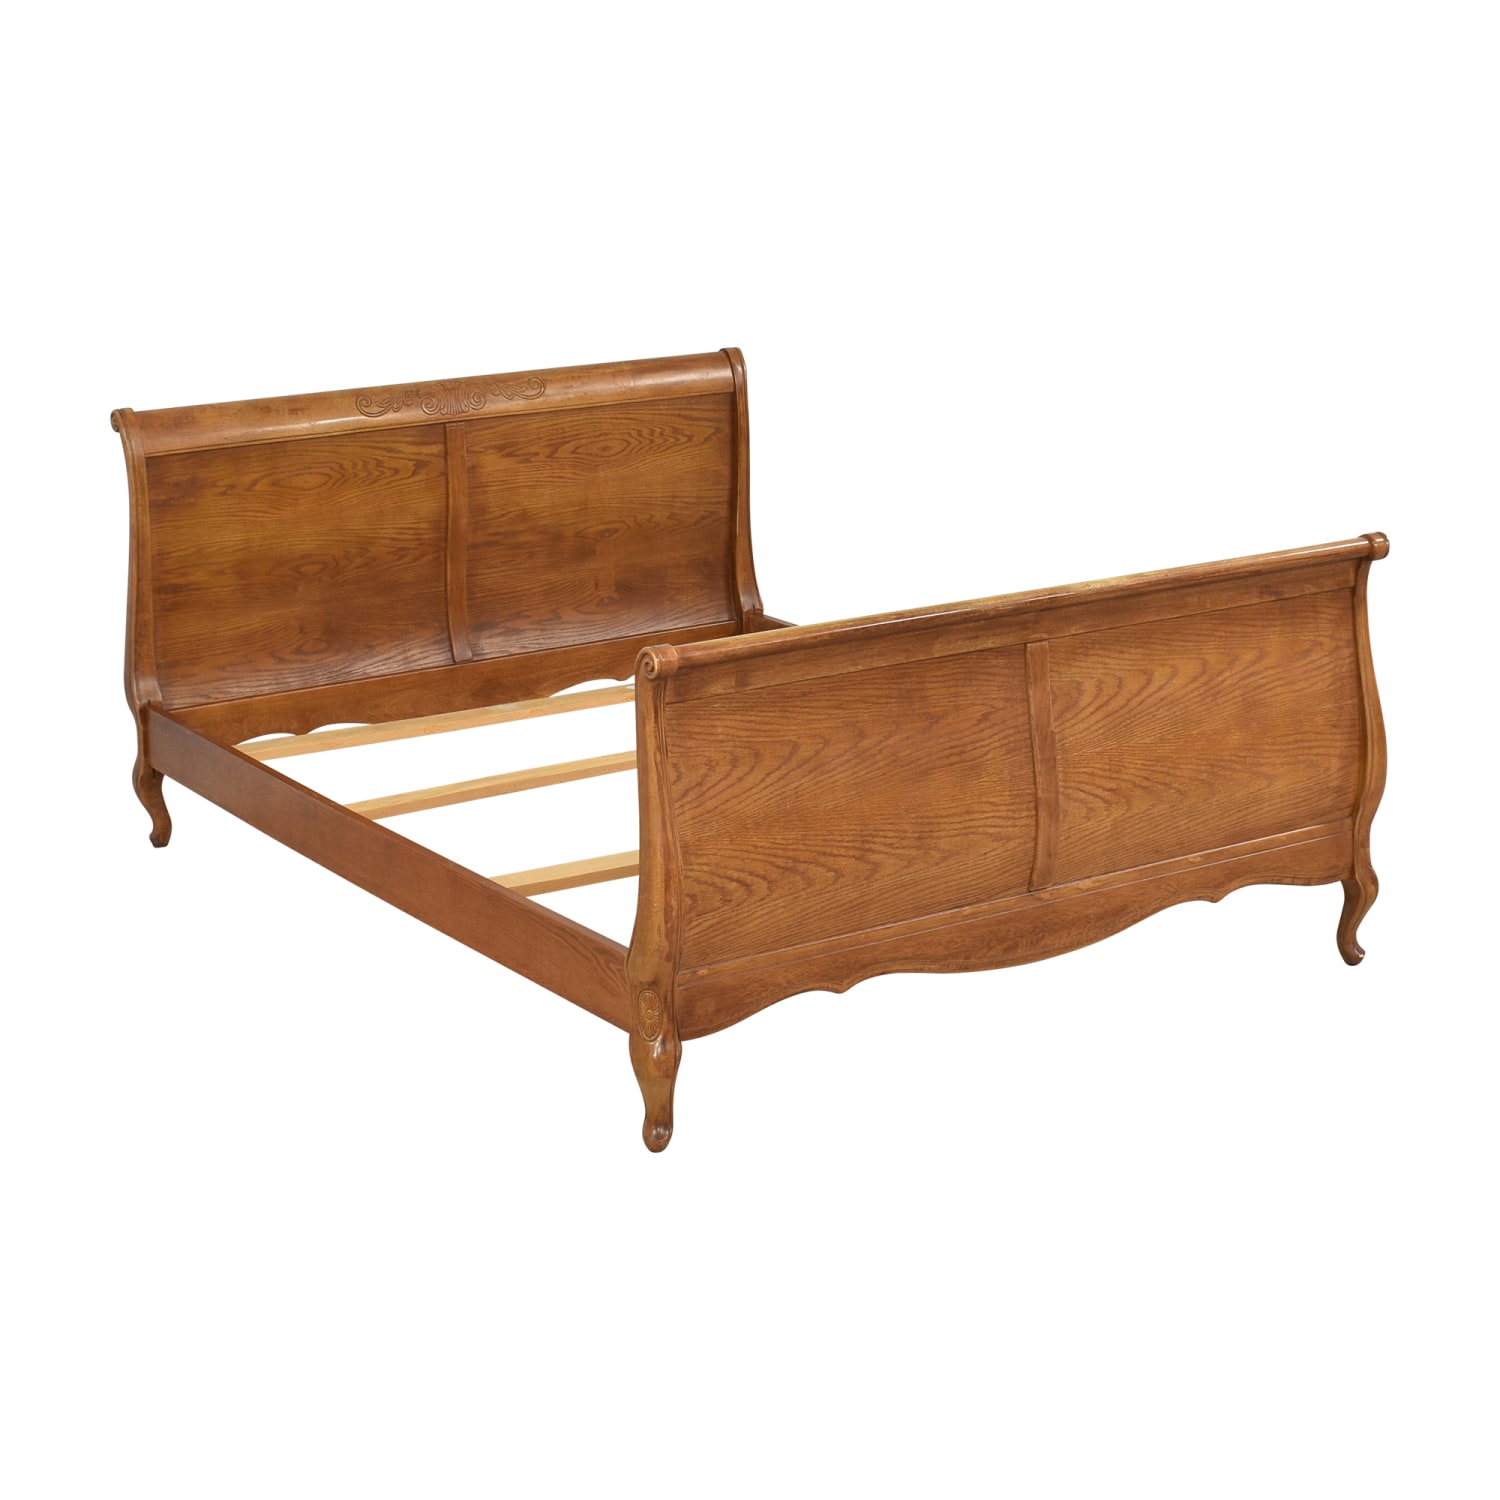 French Provincial Style Queen Sleigh Bed | 47% Off | Kaiyo